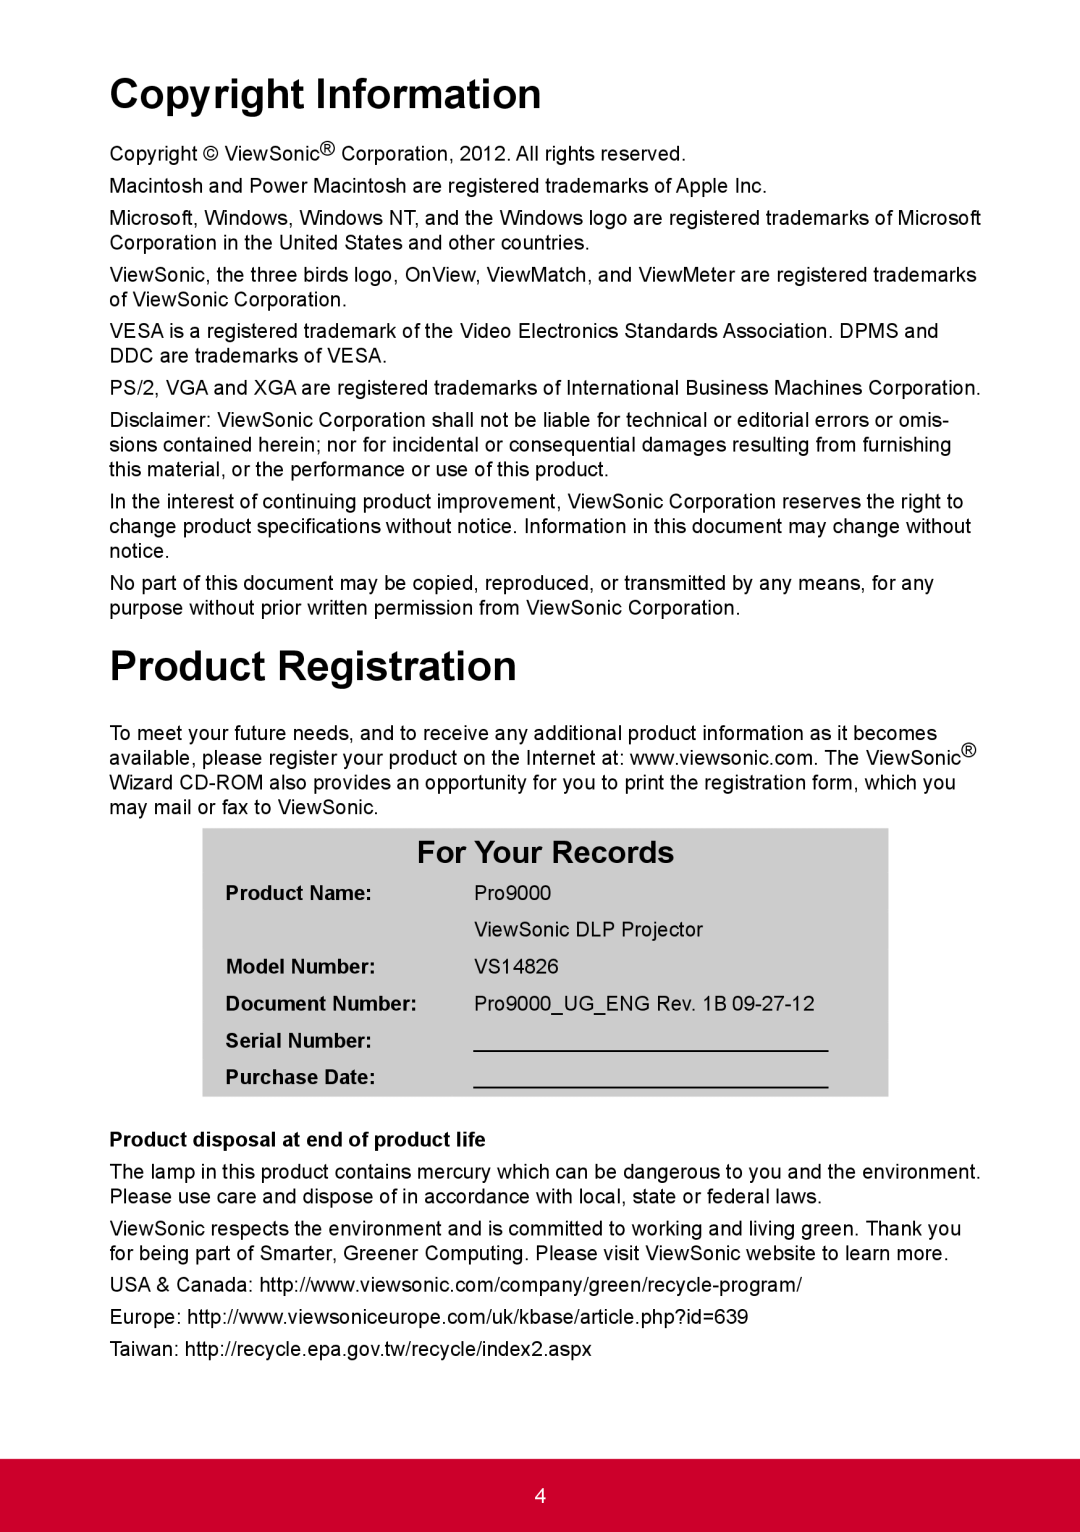 ViewSonic PRO9000 warranty Copyright Information, Product Registration, For Your Records 